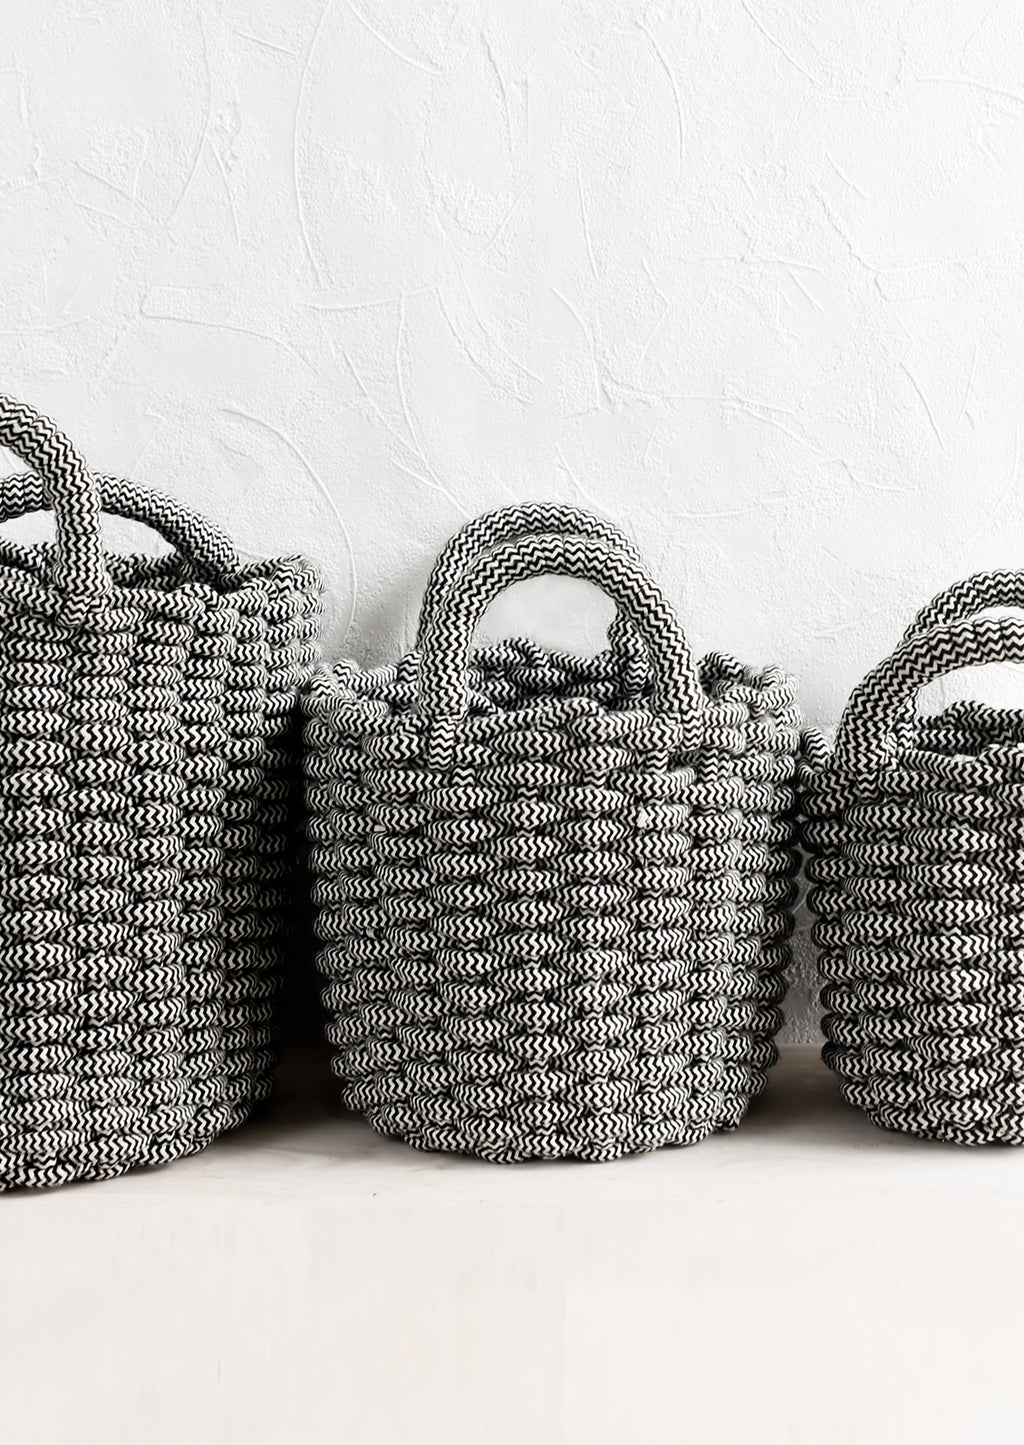 2: Black and white woven rope baskets in three incremental sizes.